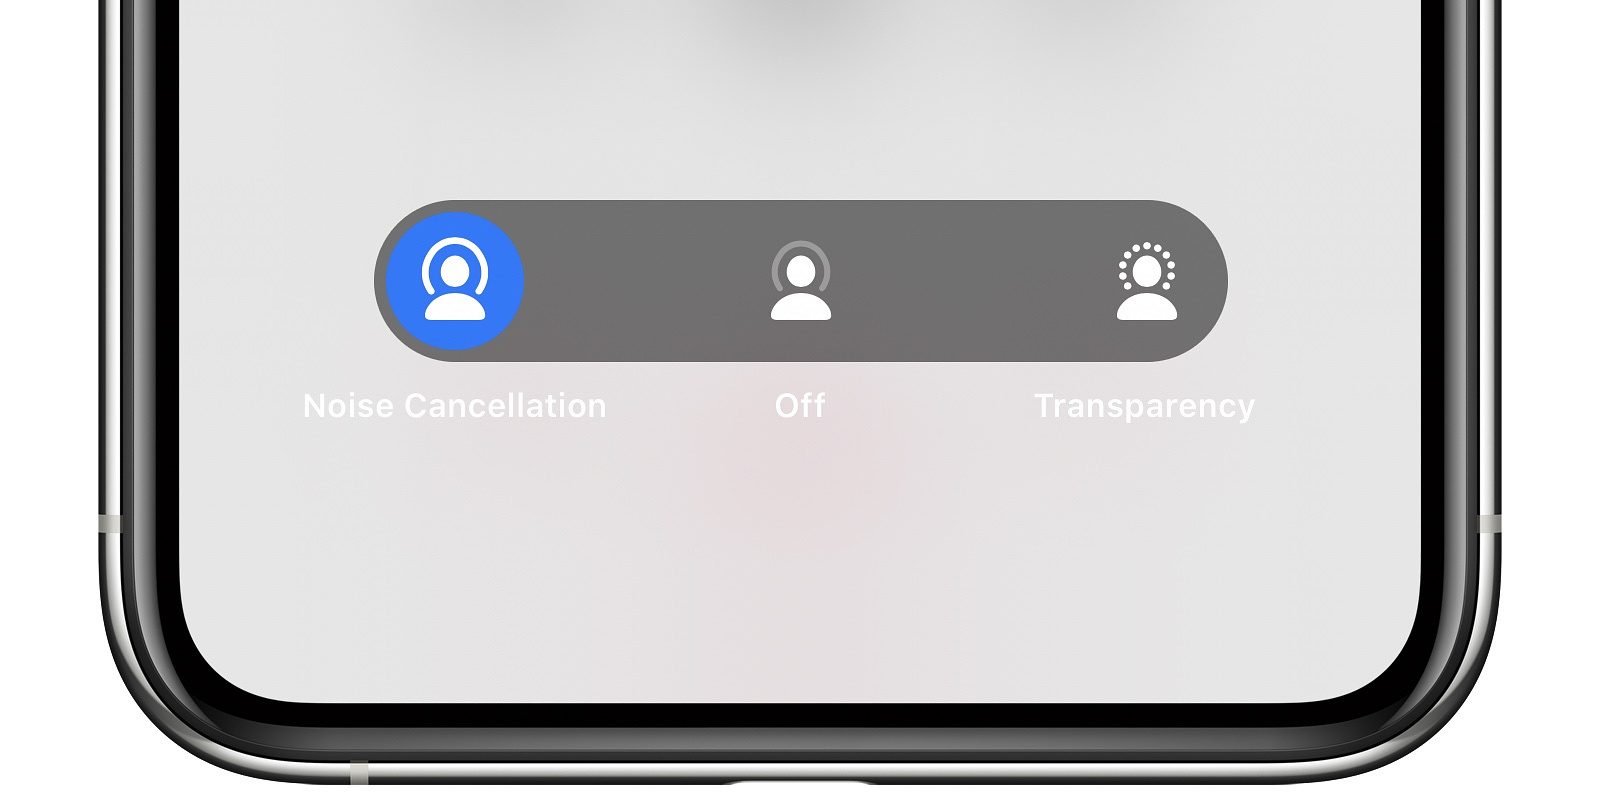 You can switch between modes via a long hold / squeeze of the AirPods stem, or via a long press on the volume control in the Control Center